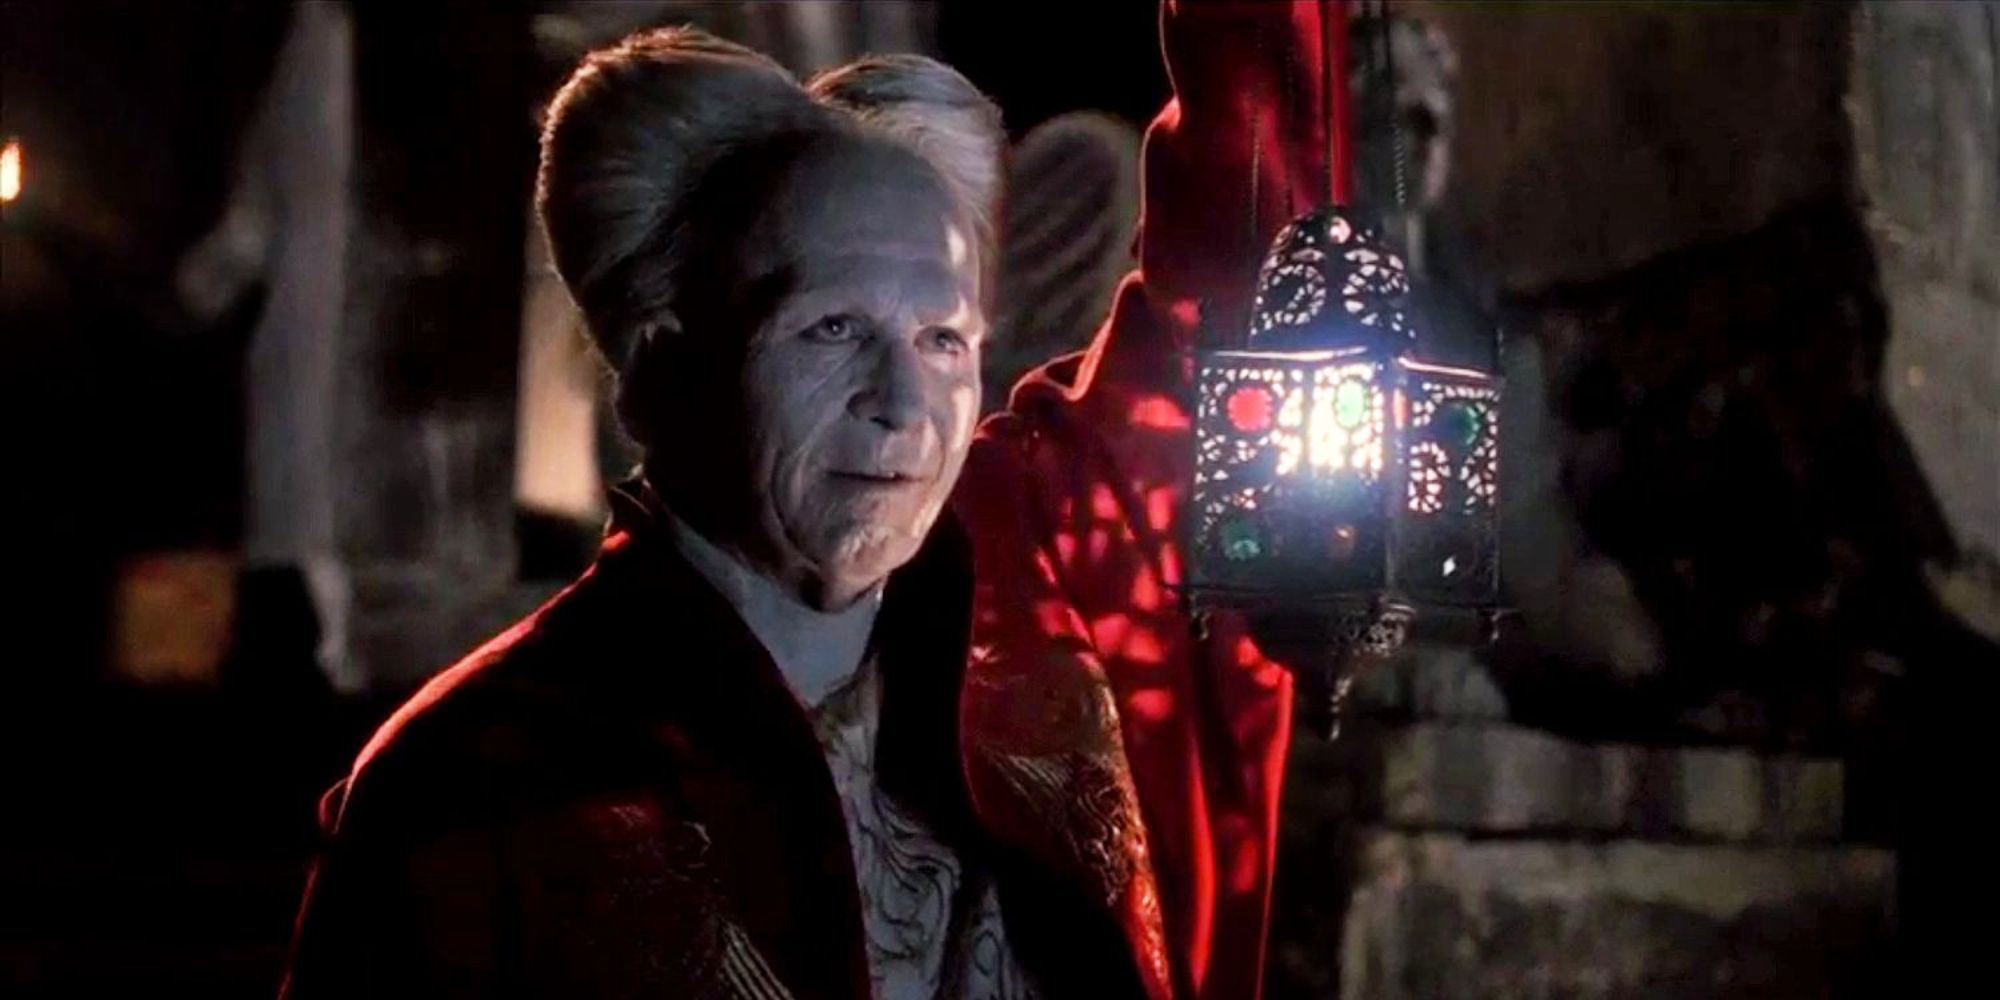 Dracula smiling and holding a lamp in Bram Stoker's Dracula